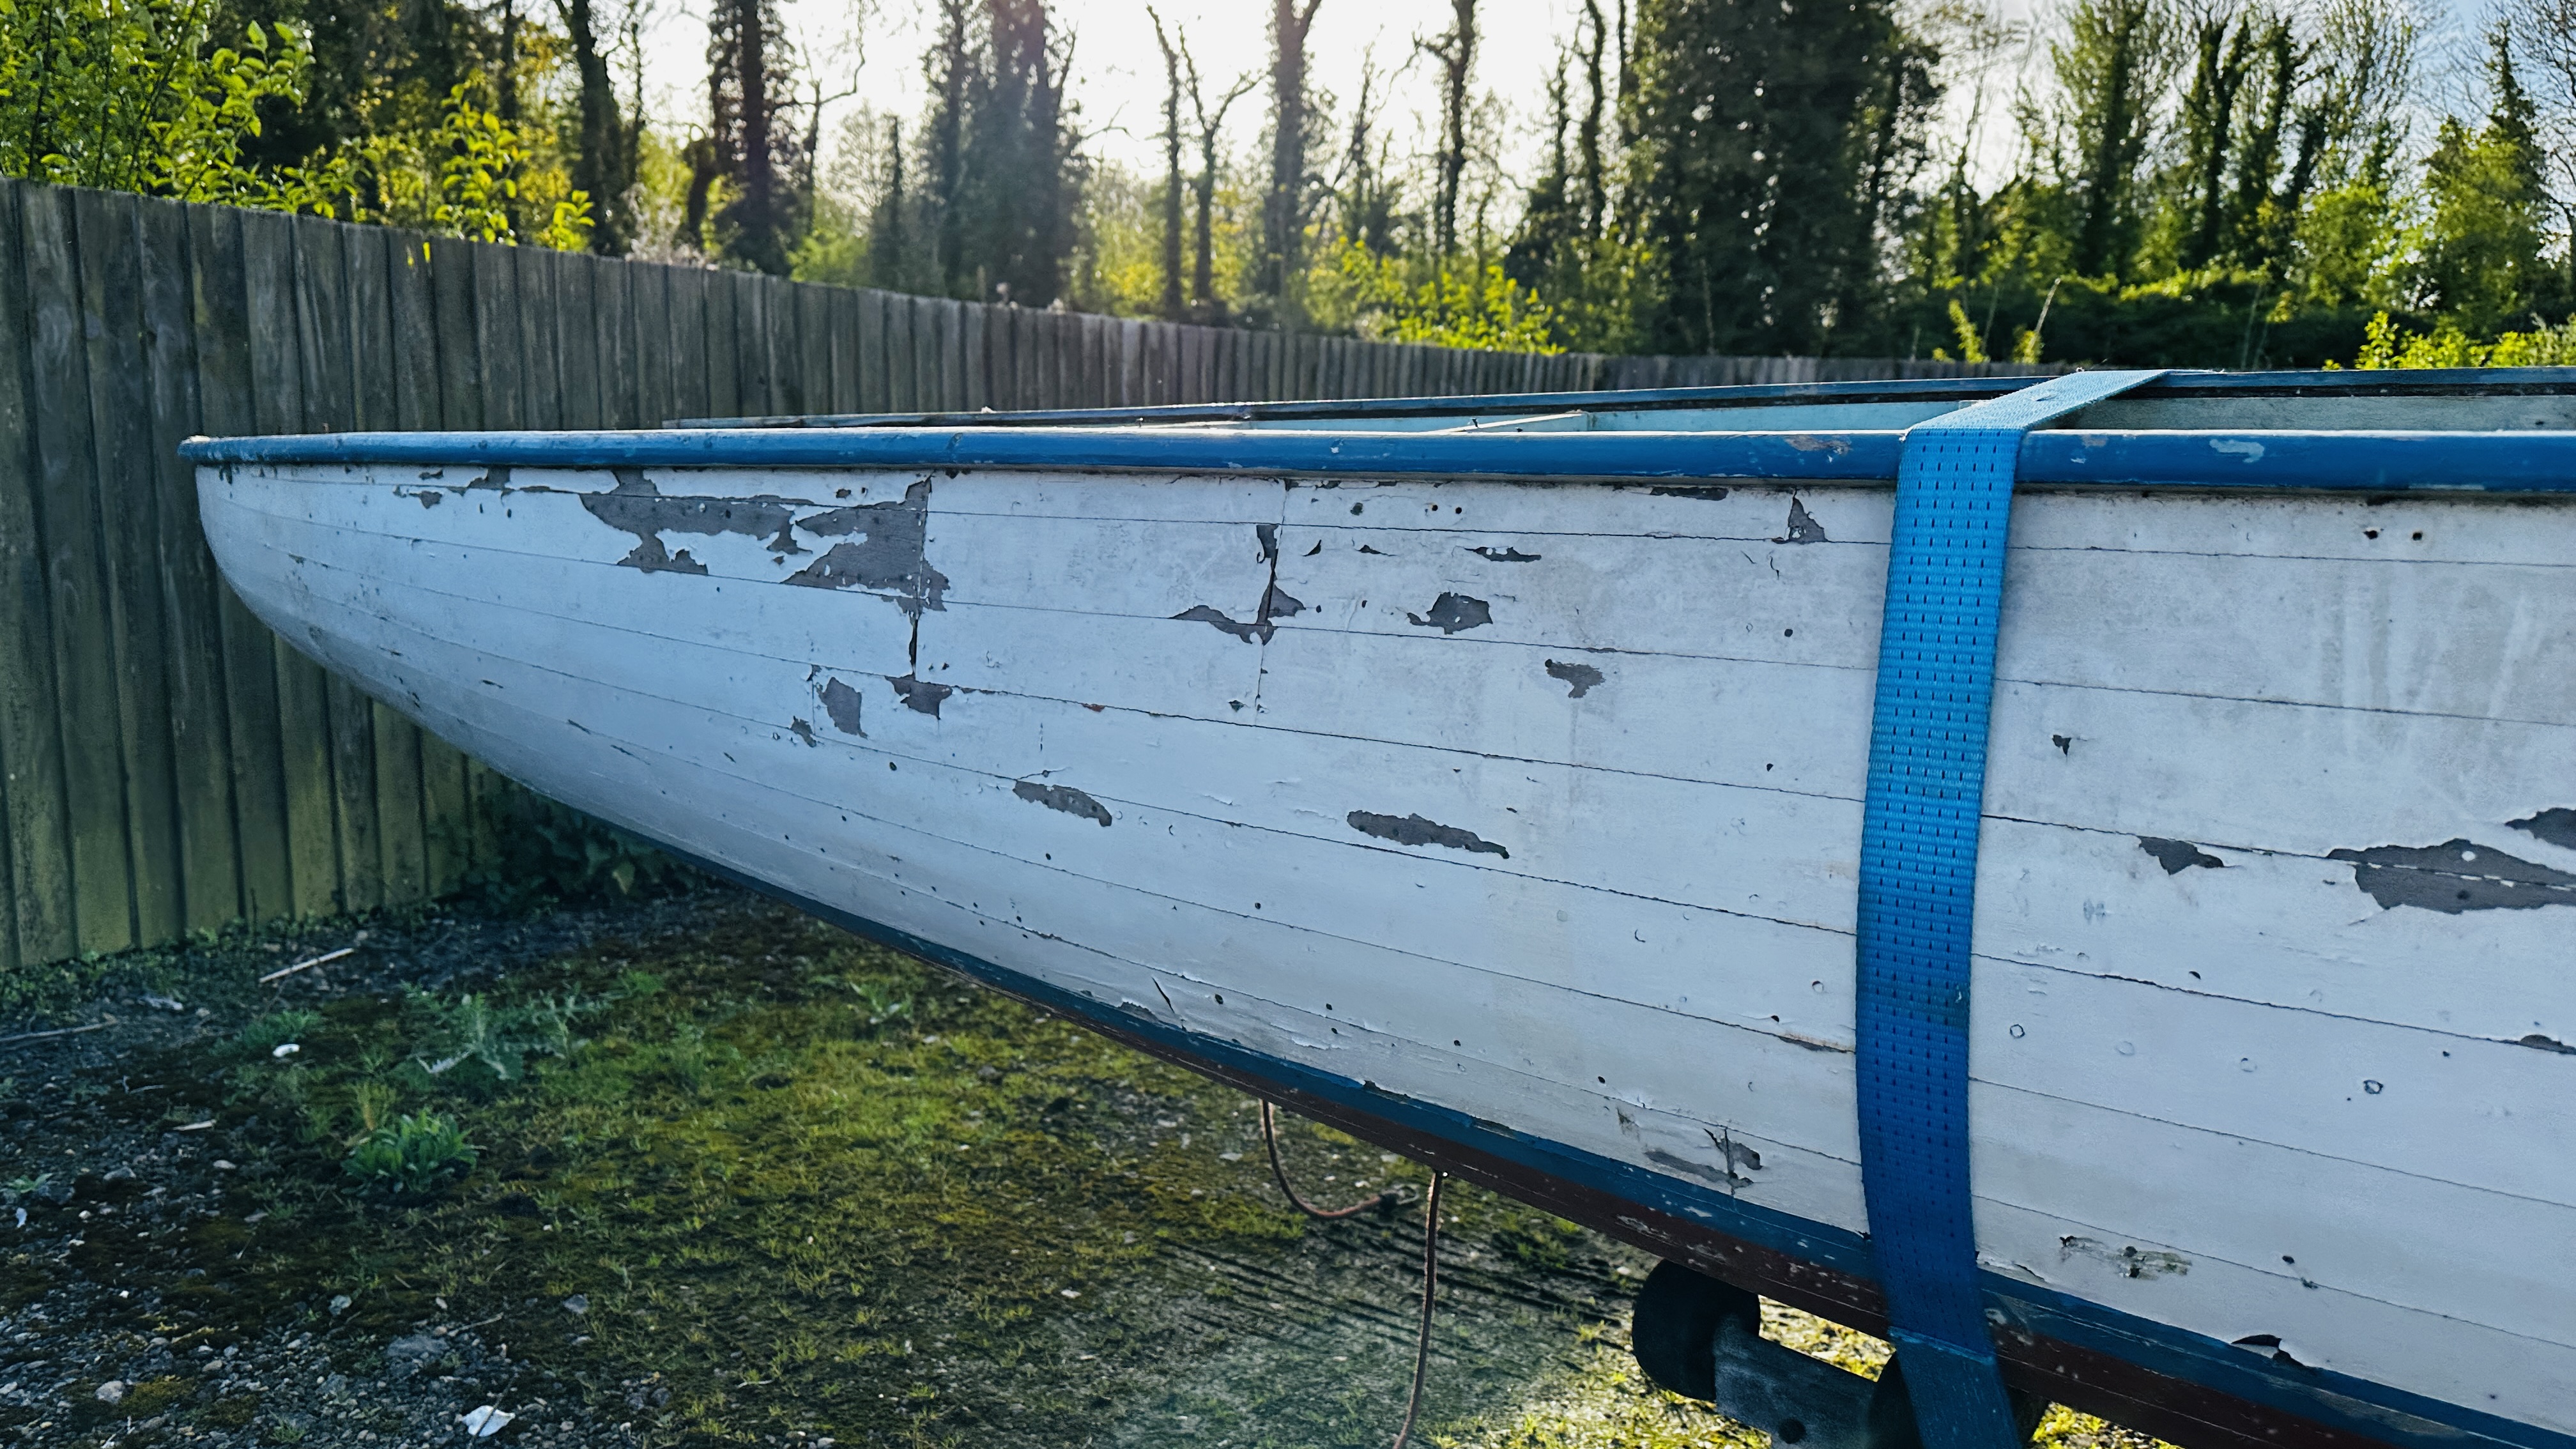 A WW2 UFFA FOX RESCUE BOAT BELIEVED TO BE BUILT BY TAYLOR WOODROW, STAMPED AW11, 1 OF 402 MADE, - Image 7 of 56